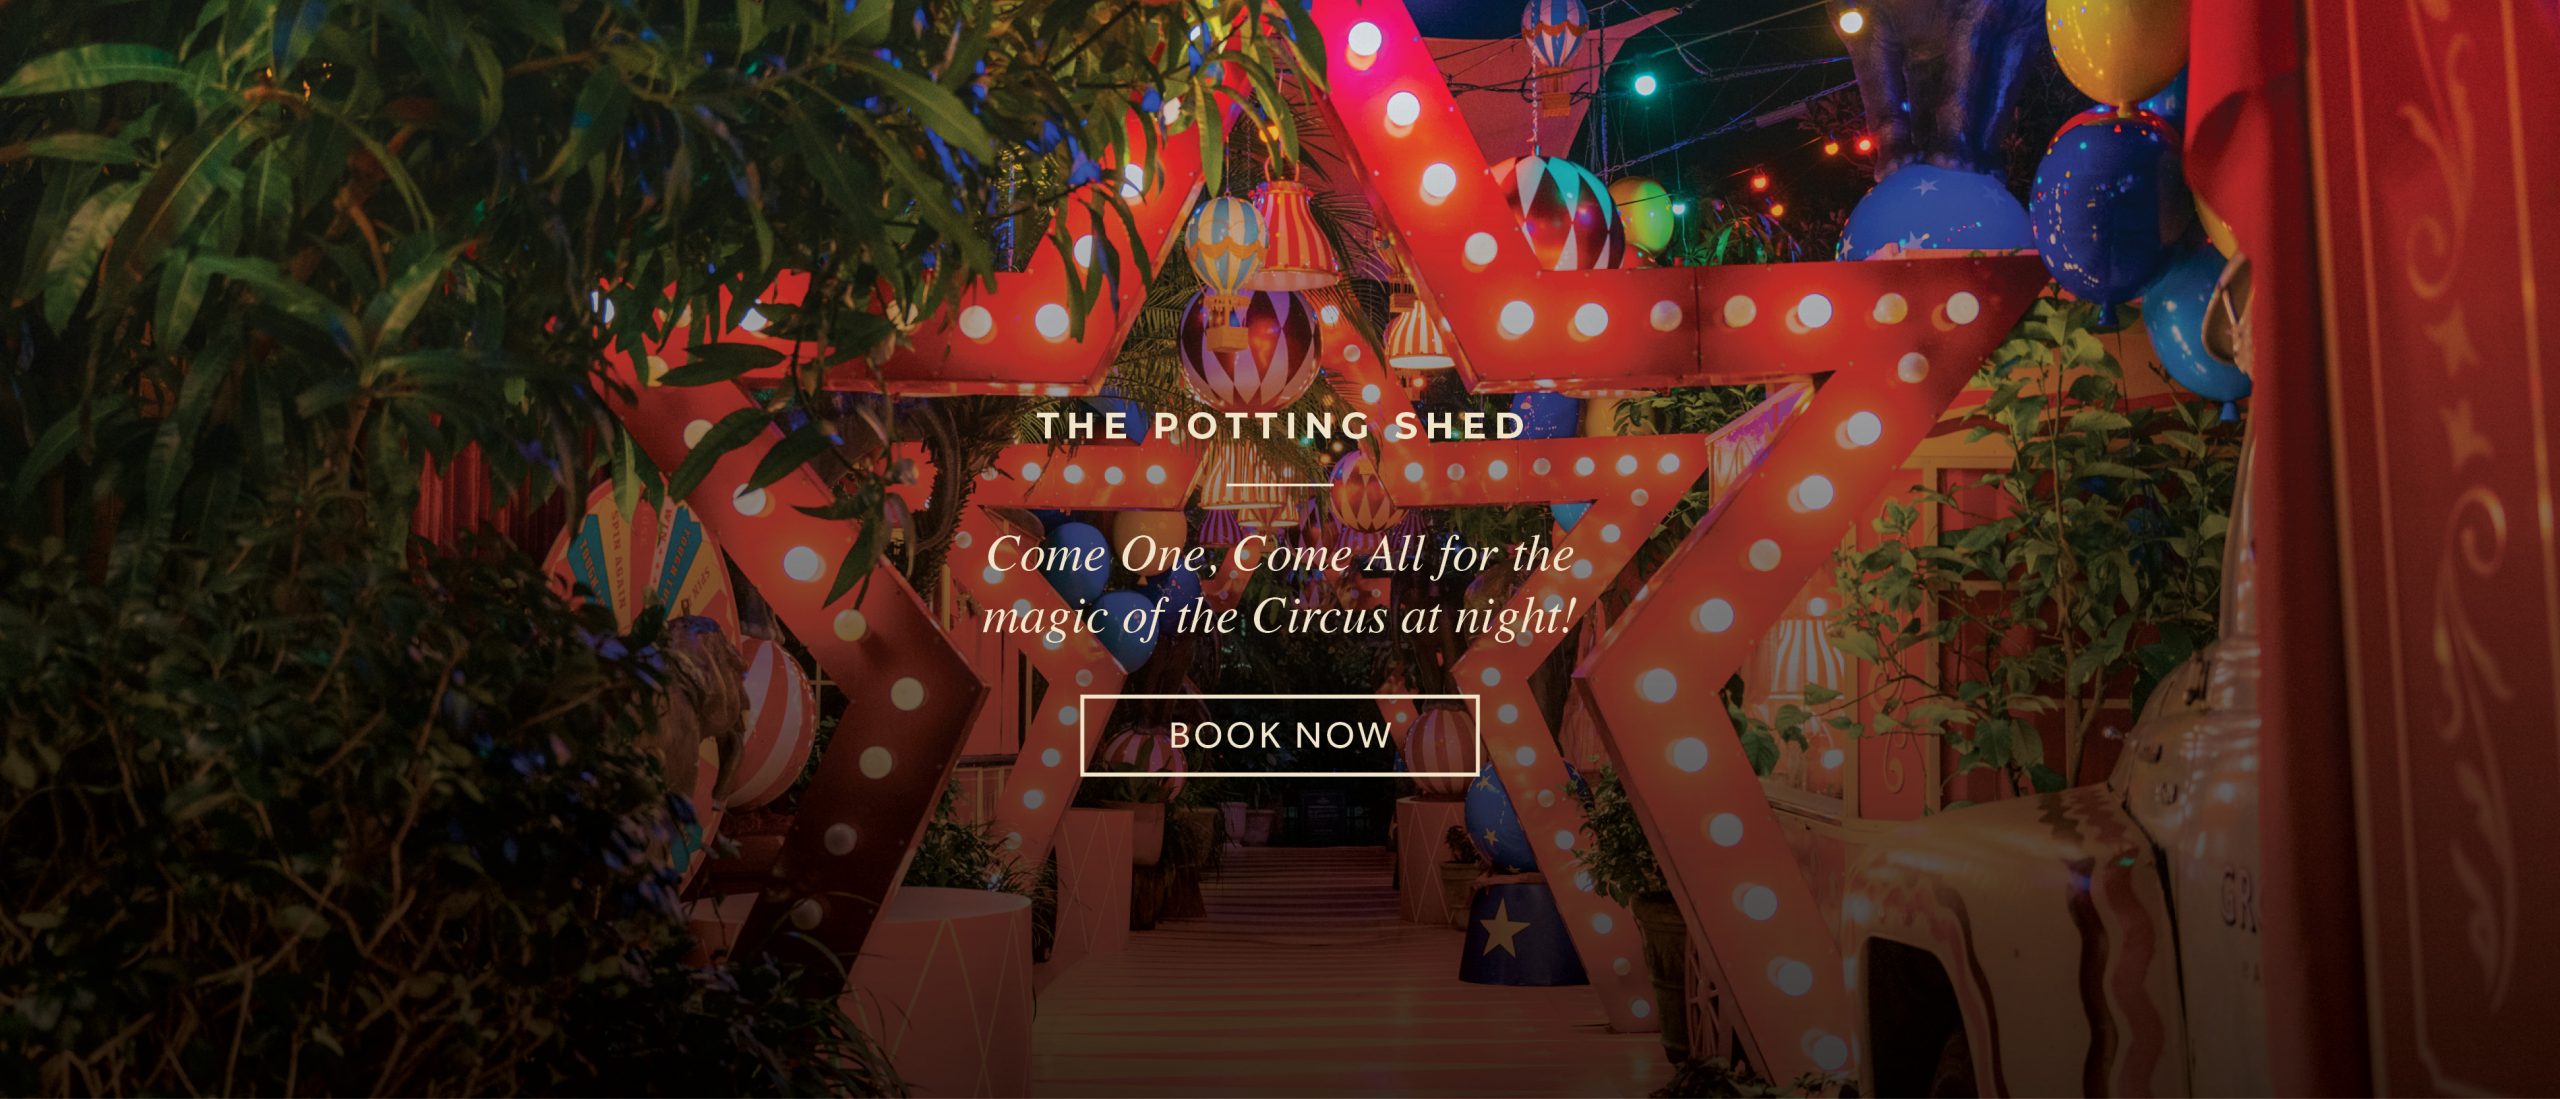 The Potting Shed | Circus